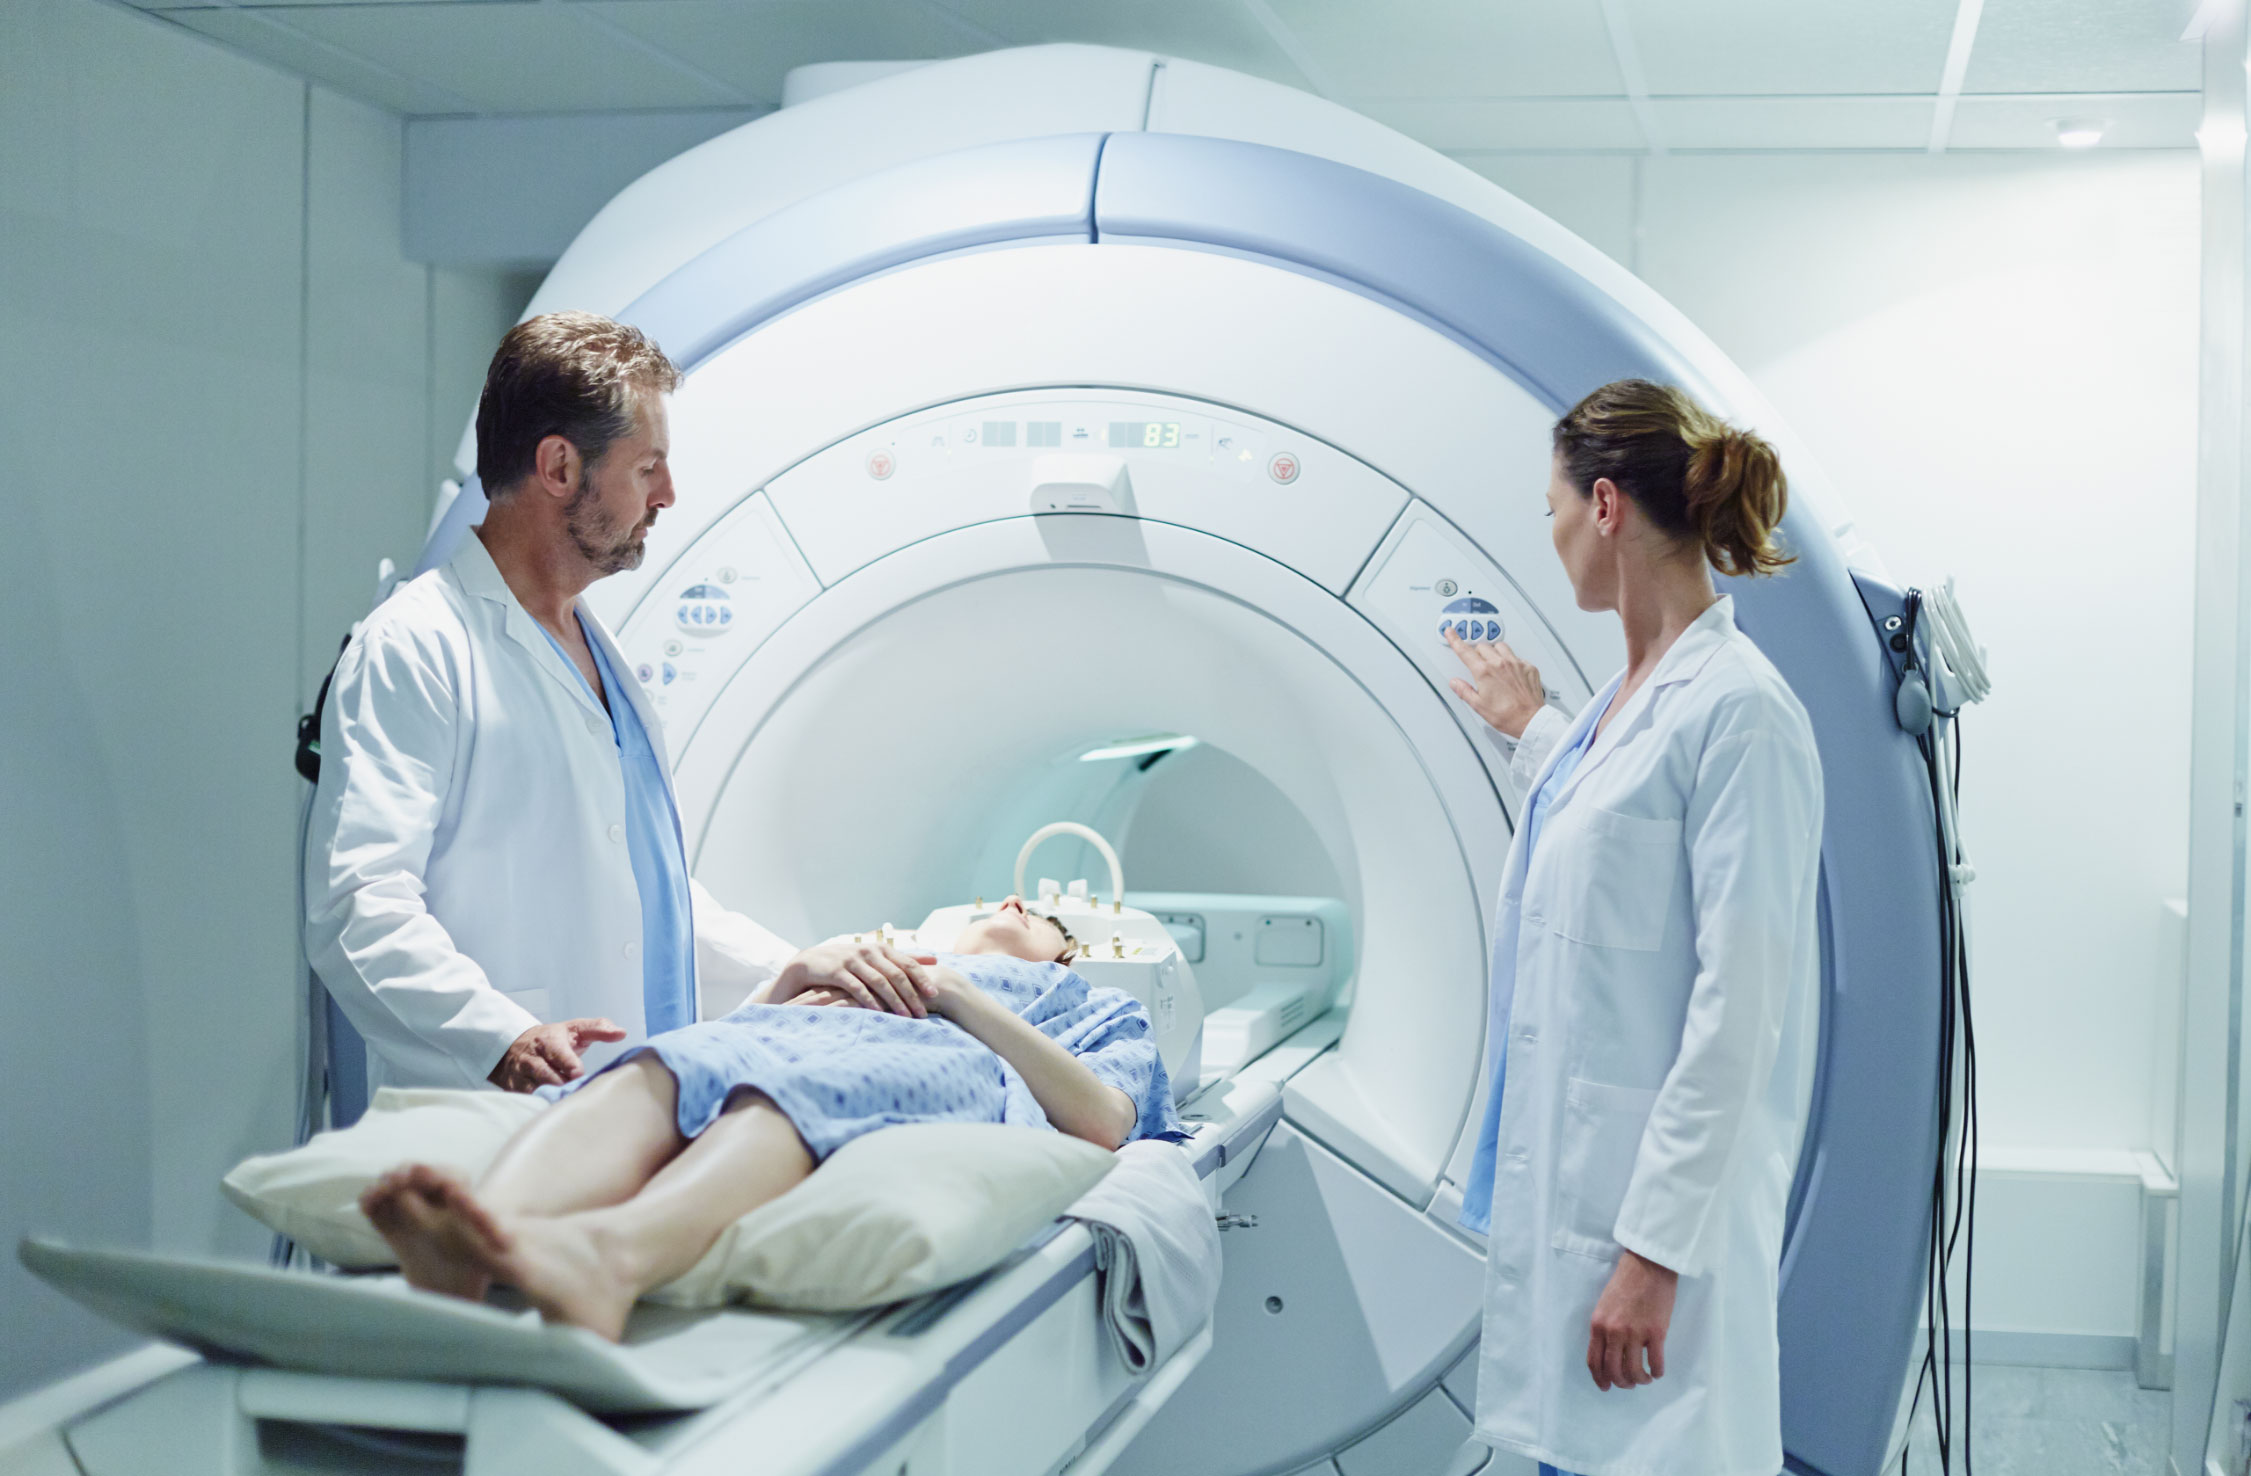 Two Doctors around patient bed during CAT Scan